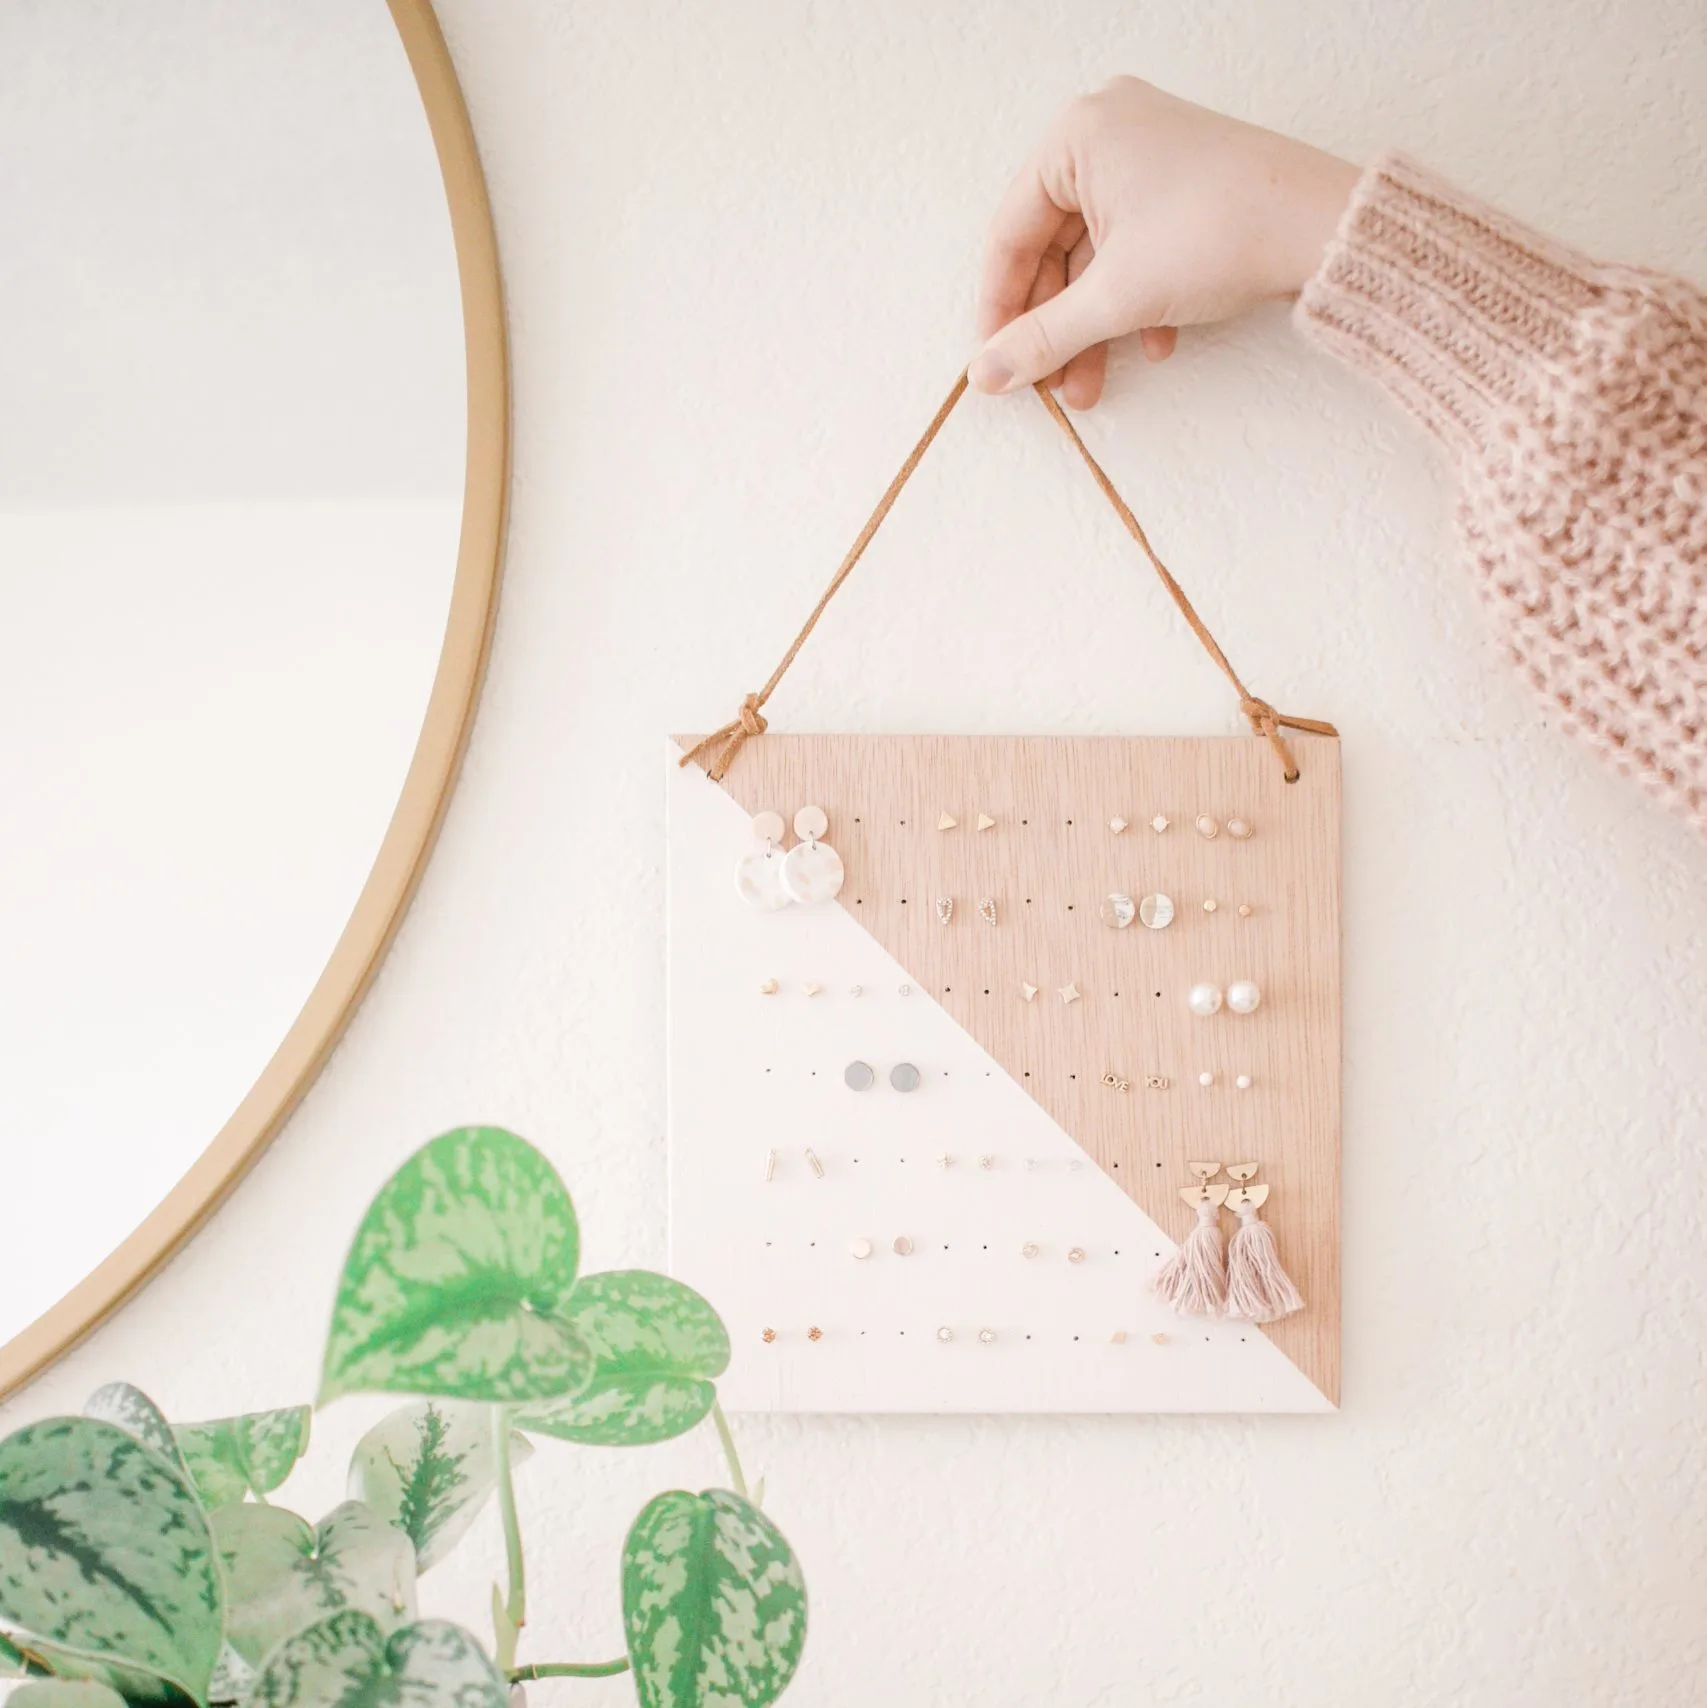 10 DIY Earring Holder Projects